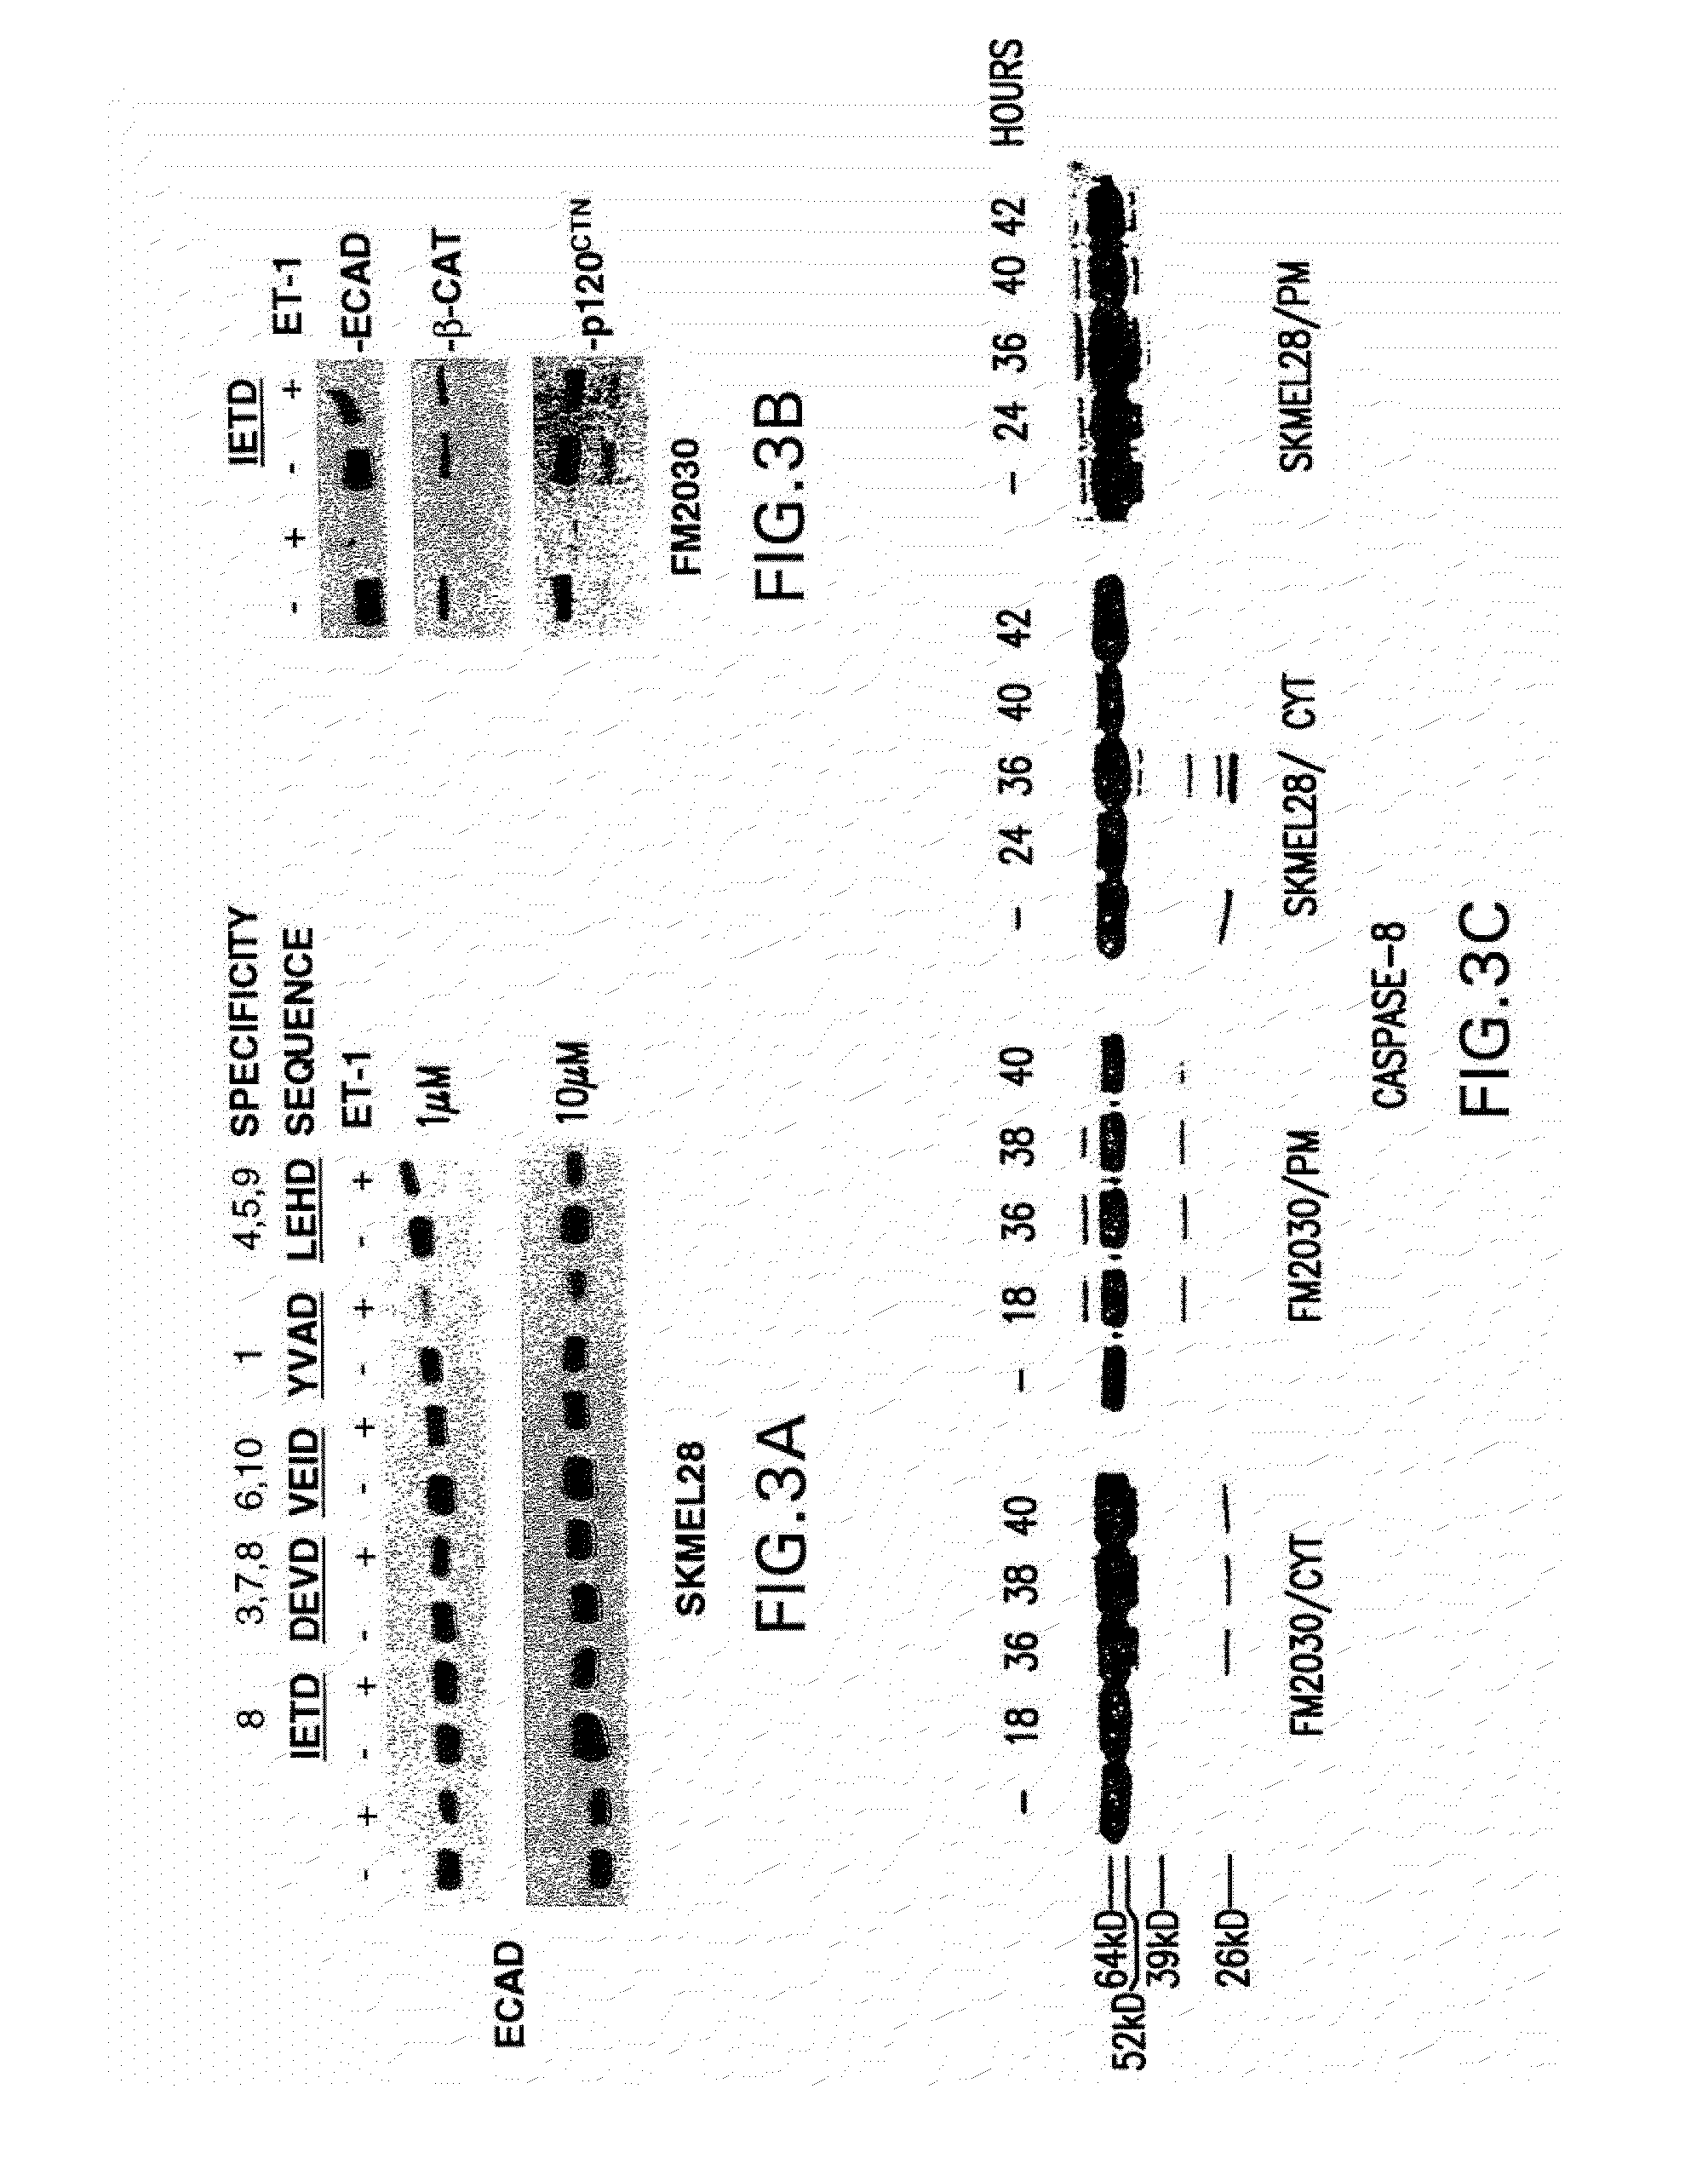 Cancer treatment with endothelin receptor antagonists